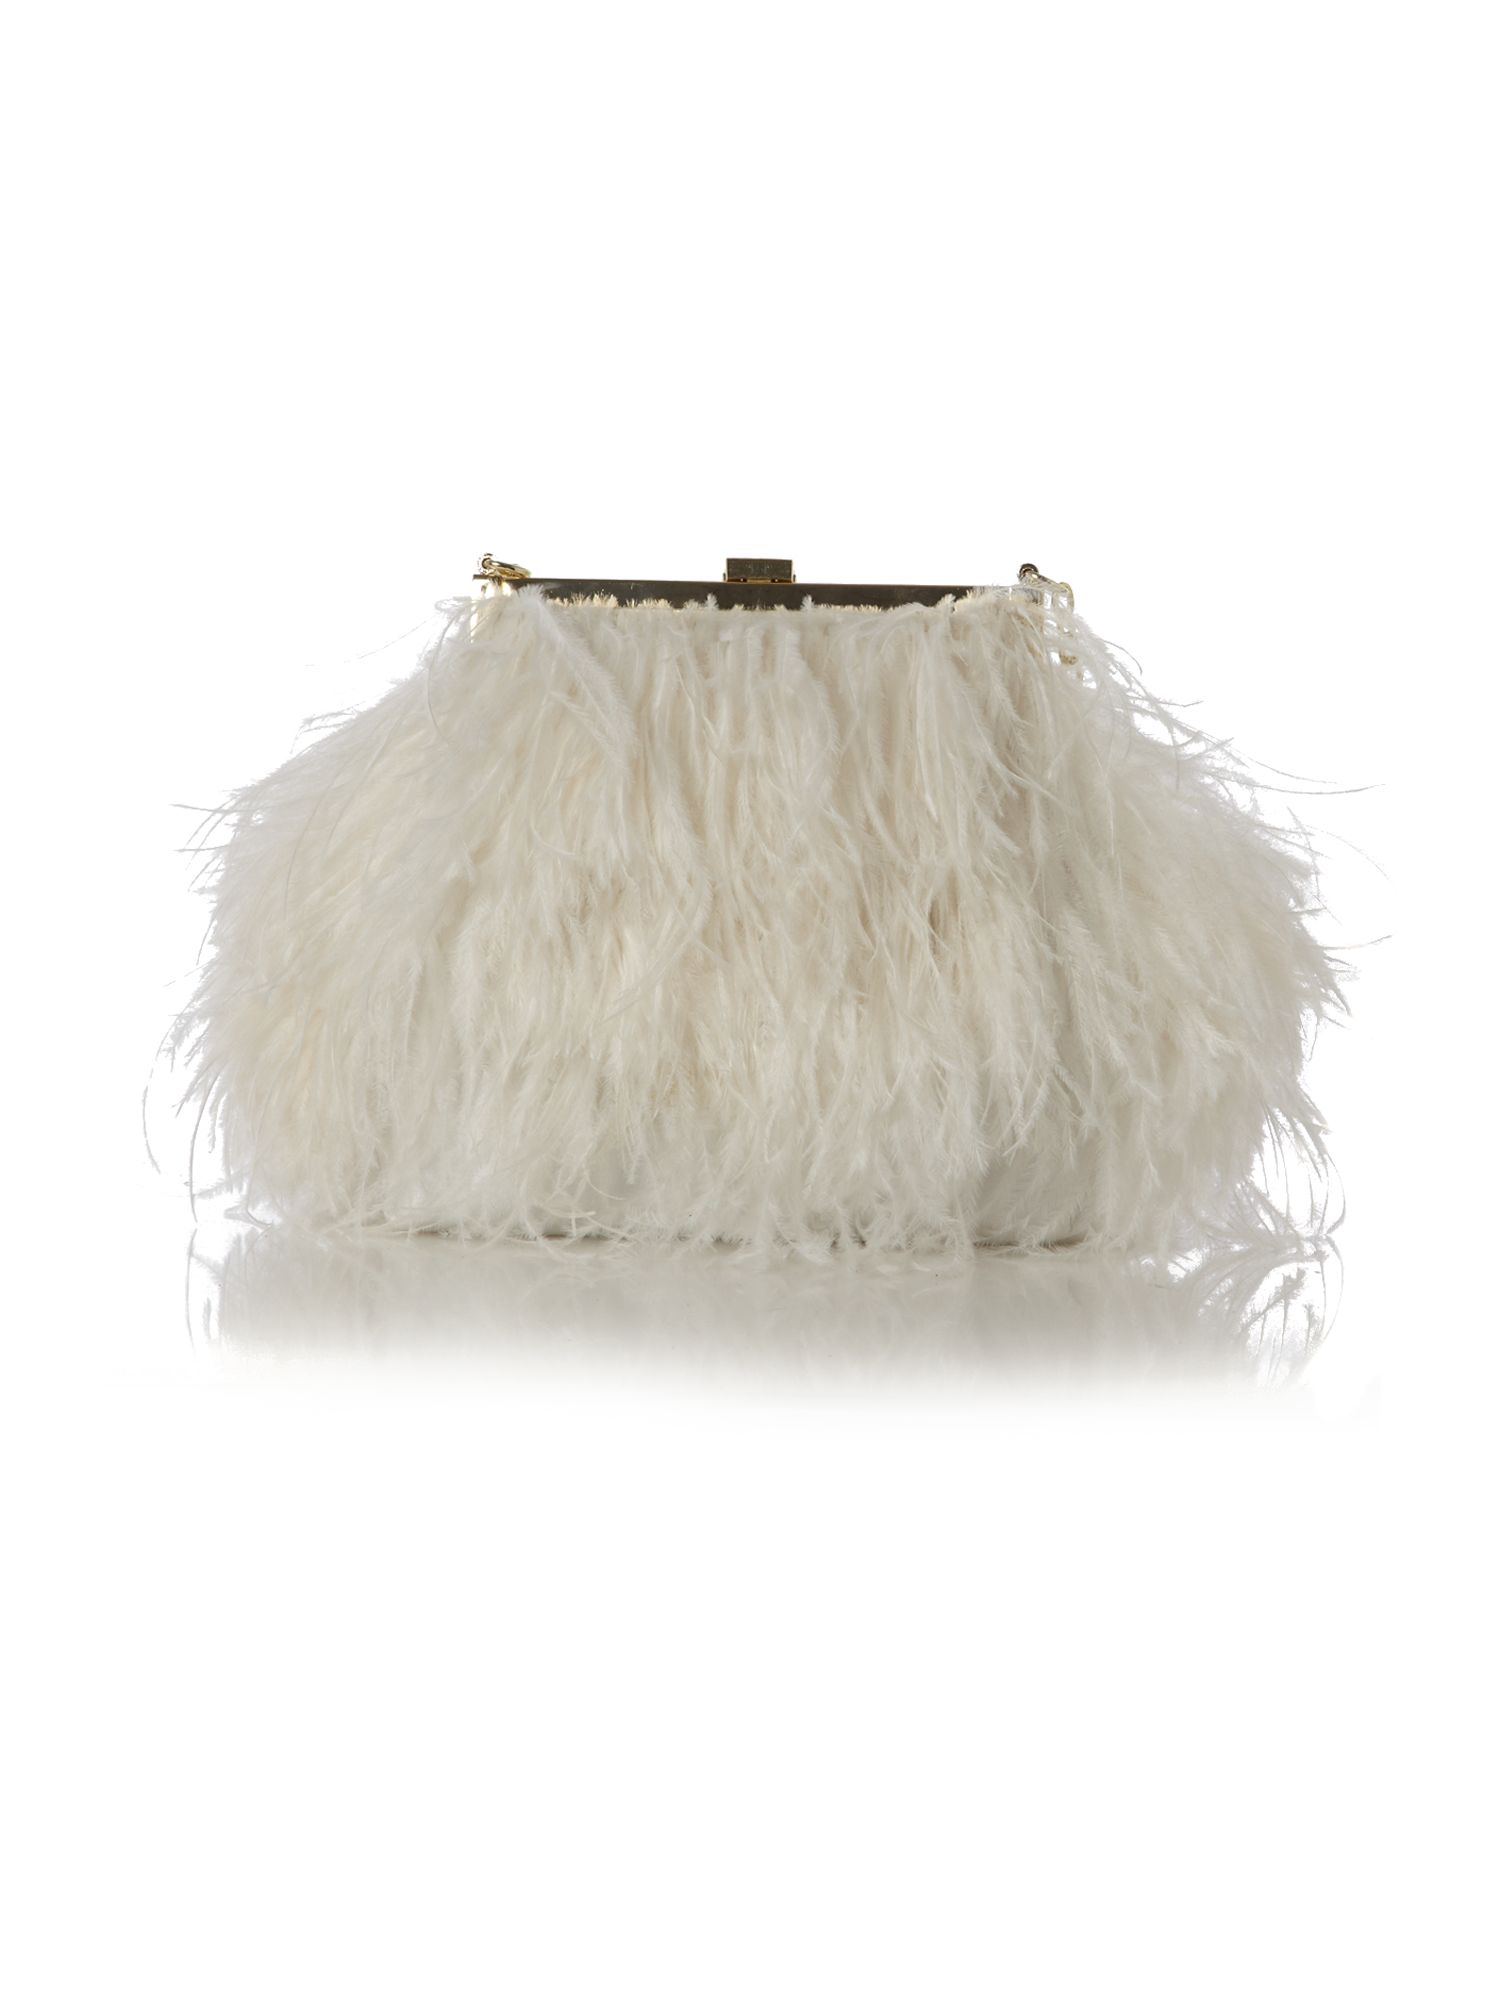 Biba Feather Chain Bag in White | Lyst